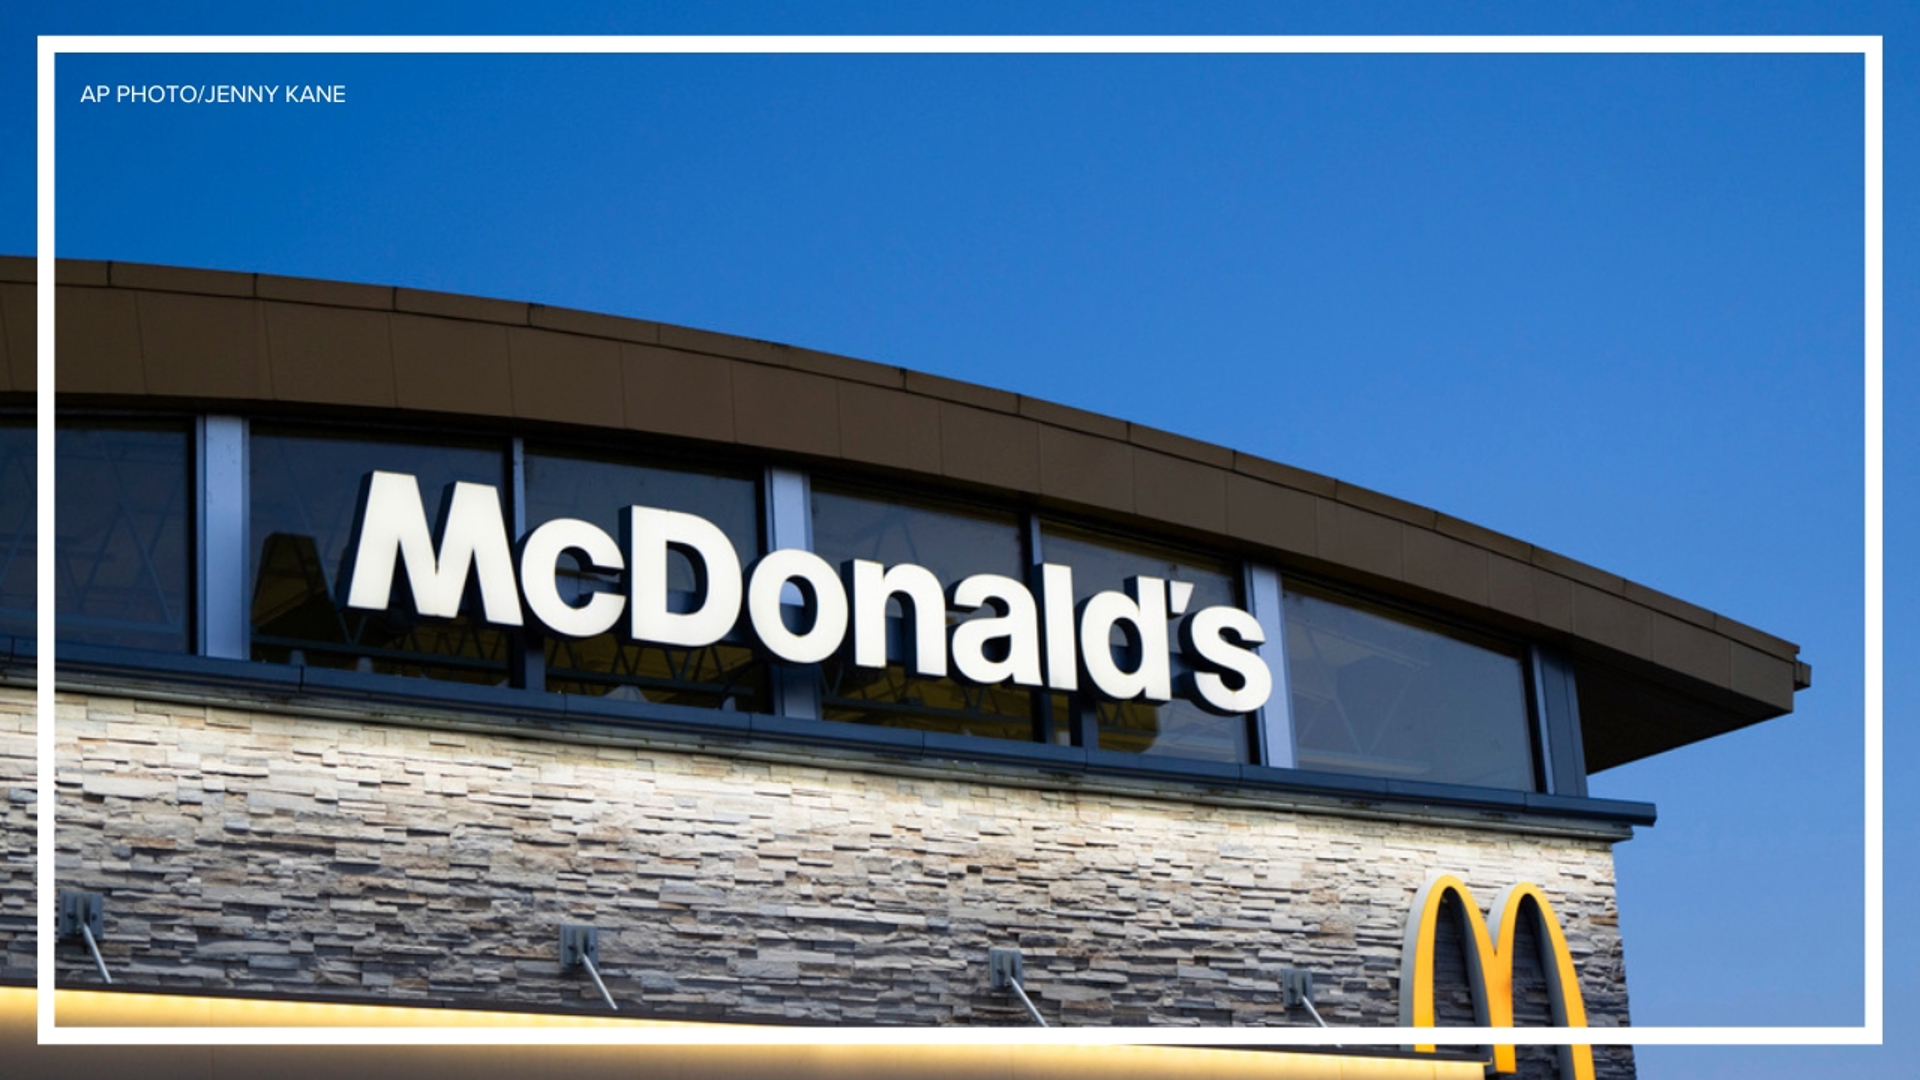 The fast food giant announced it will allow individual locations to decide if they will charge for drink refills.